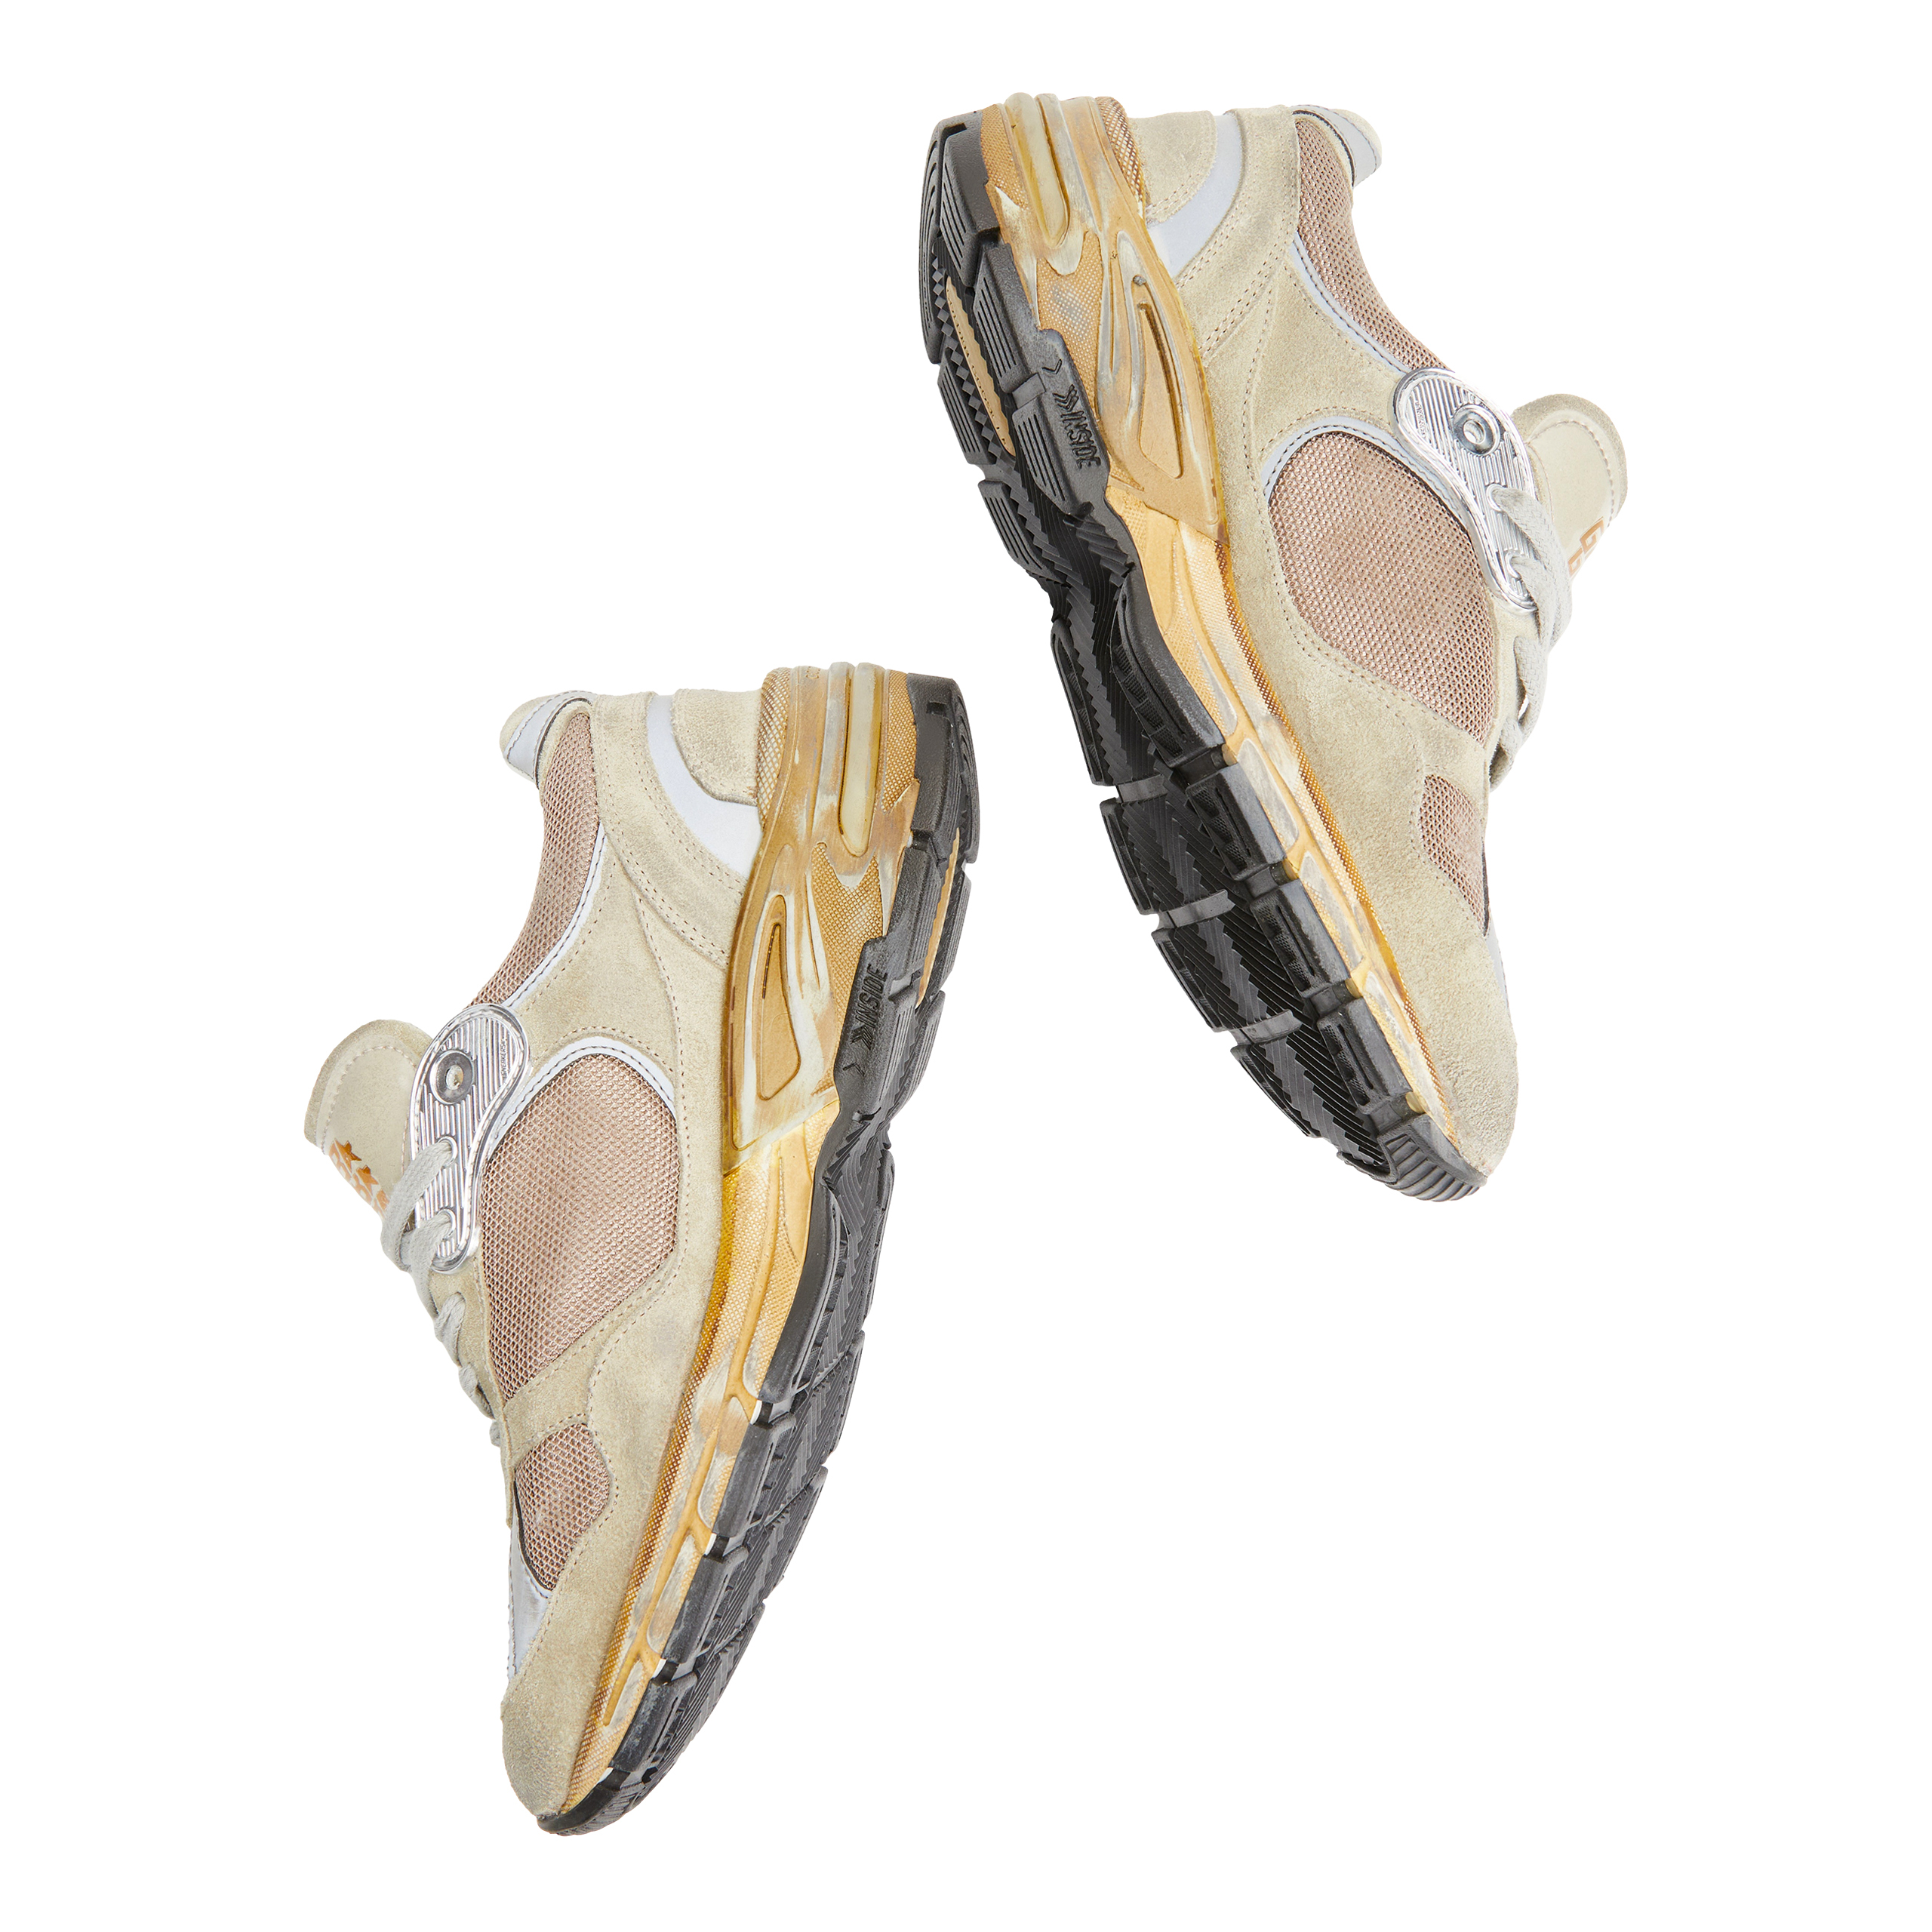 None Golden Goose Deluxe Brand GMF00199/F003271/81751, размер 40;41;42;43;44;45;46 GMF00199/F003271/81751 - фото 2